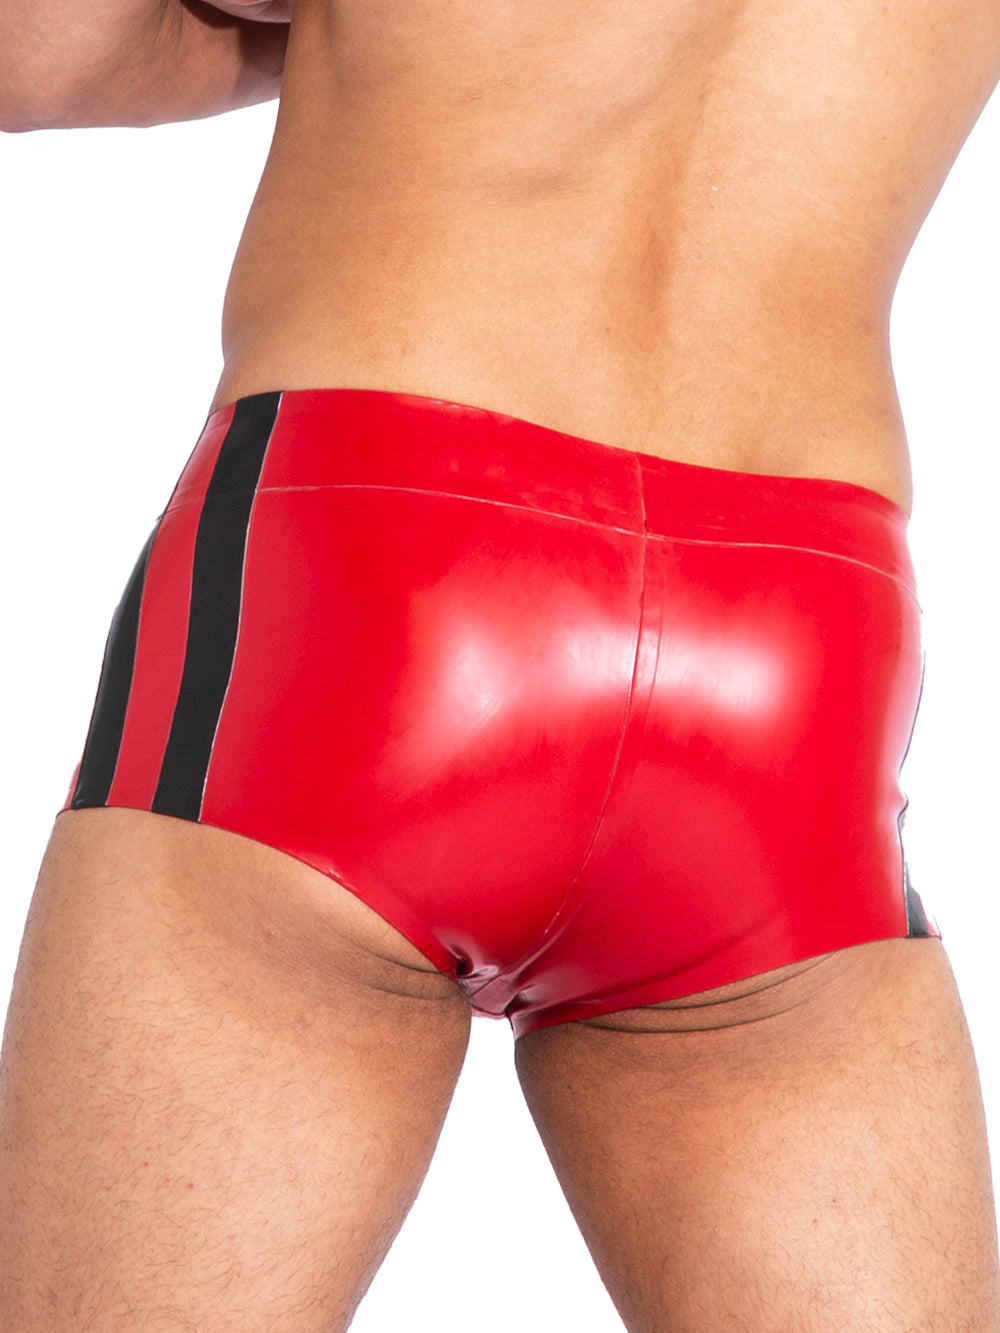 Rosso Fire Shorts - Honour Clothing